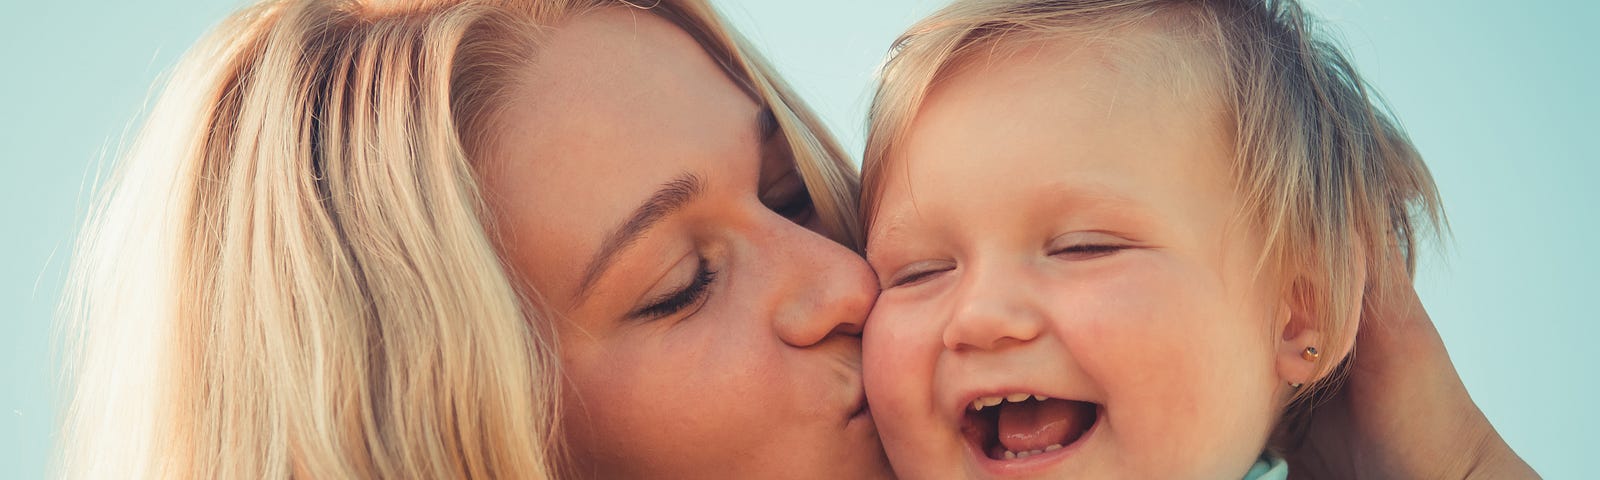 Woman with blonde hair her kissing a small baby on the cheek